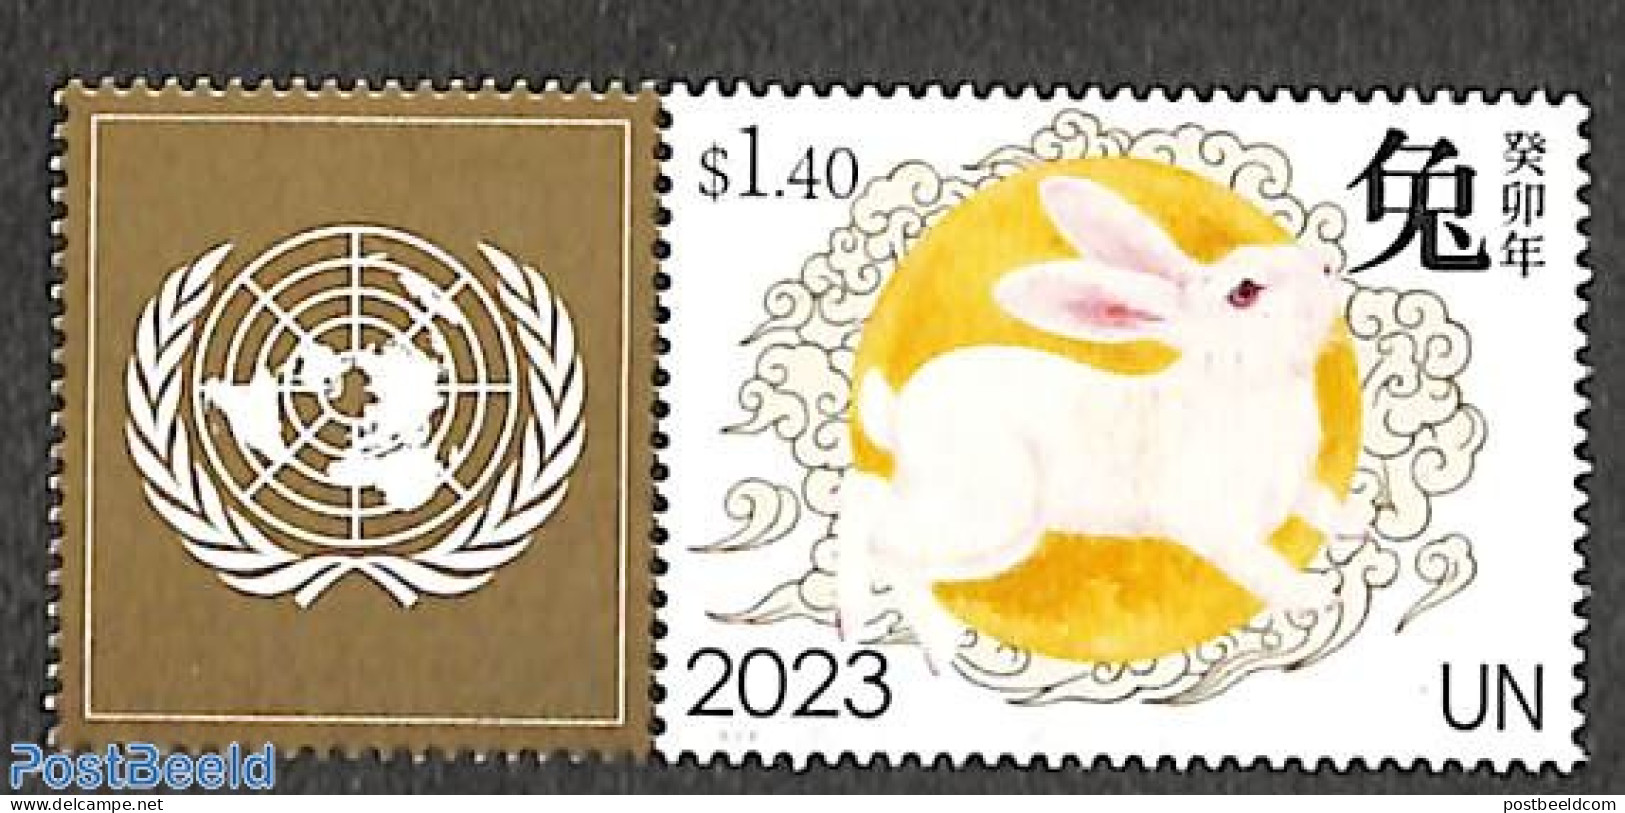 United Nations, New York 2023 Year Of The Rabbit 1v+tab, Mint NH, Nature - Various - Rabbits / Hares - New Year - Nouvel An